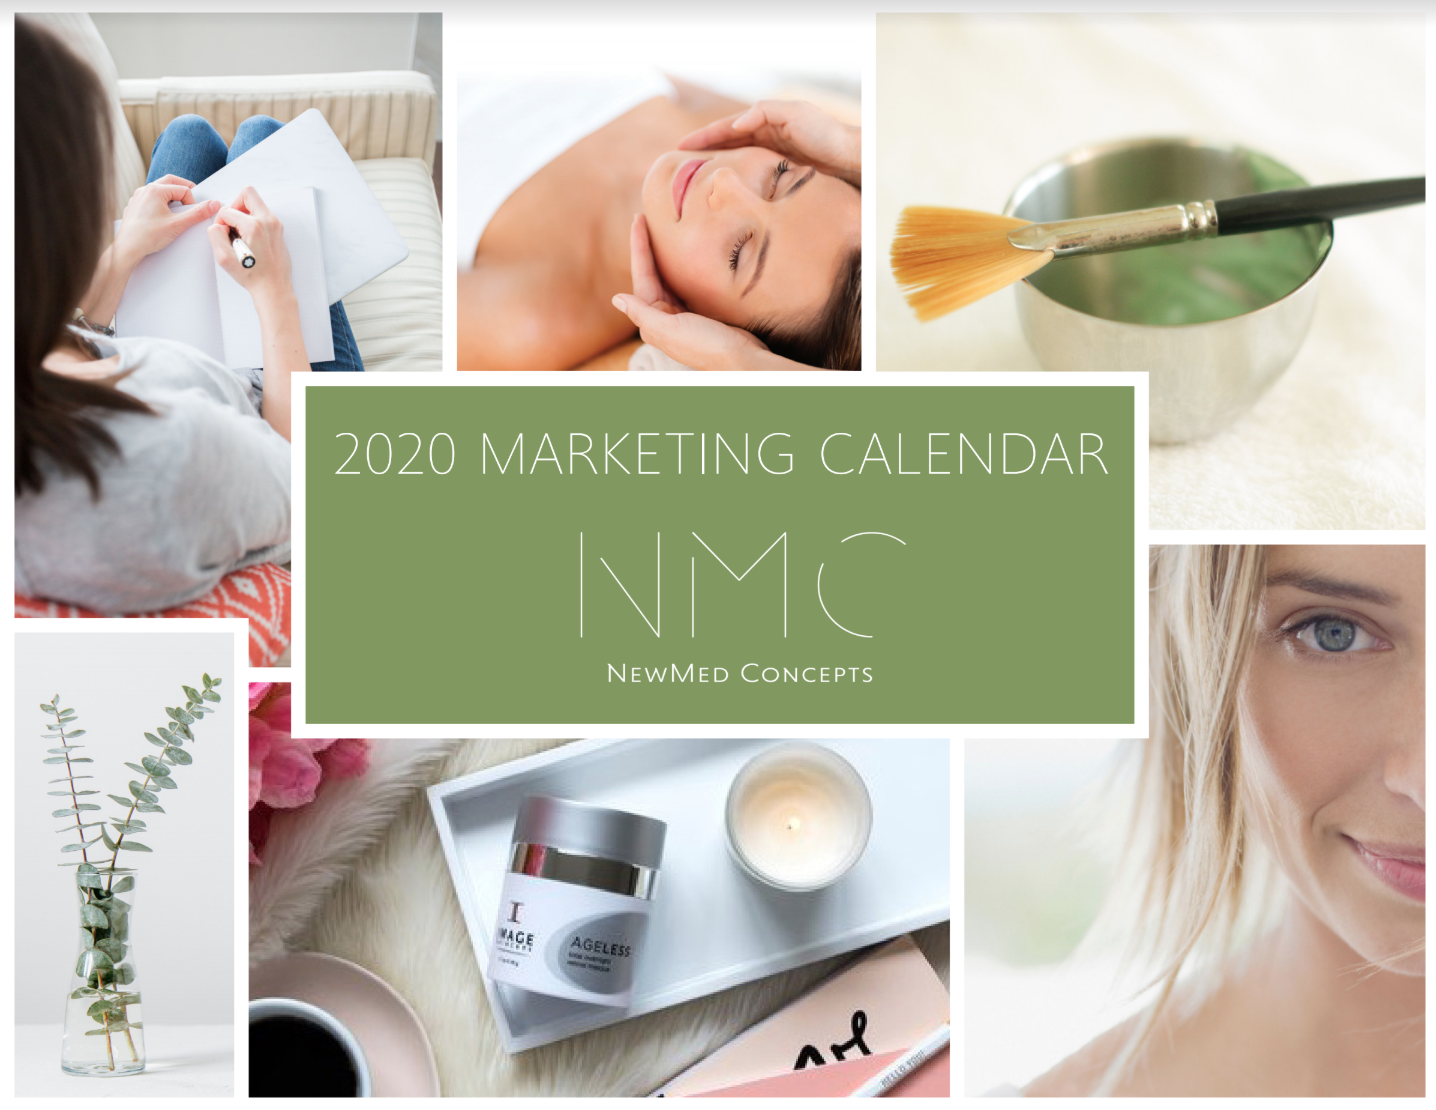 You are currently viewing Free 2020 Marketing Calendar Template for Spas and Estheticians